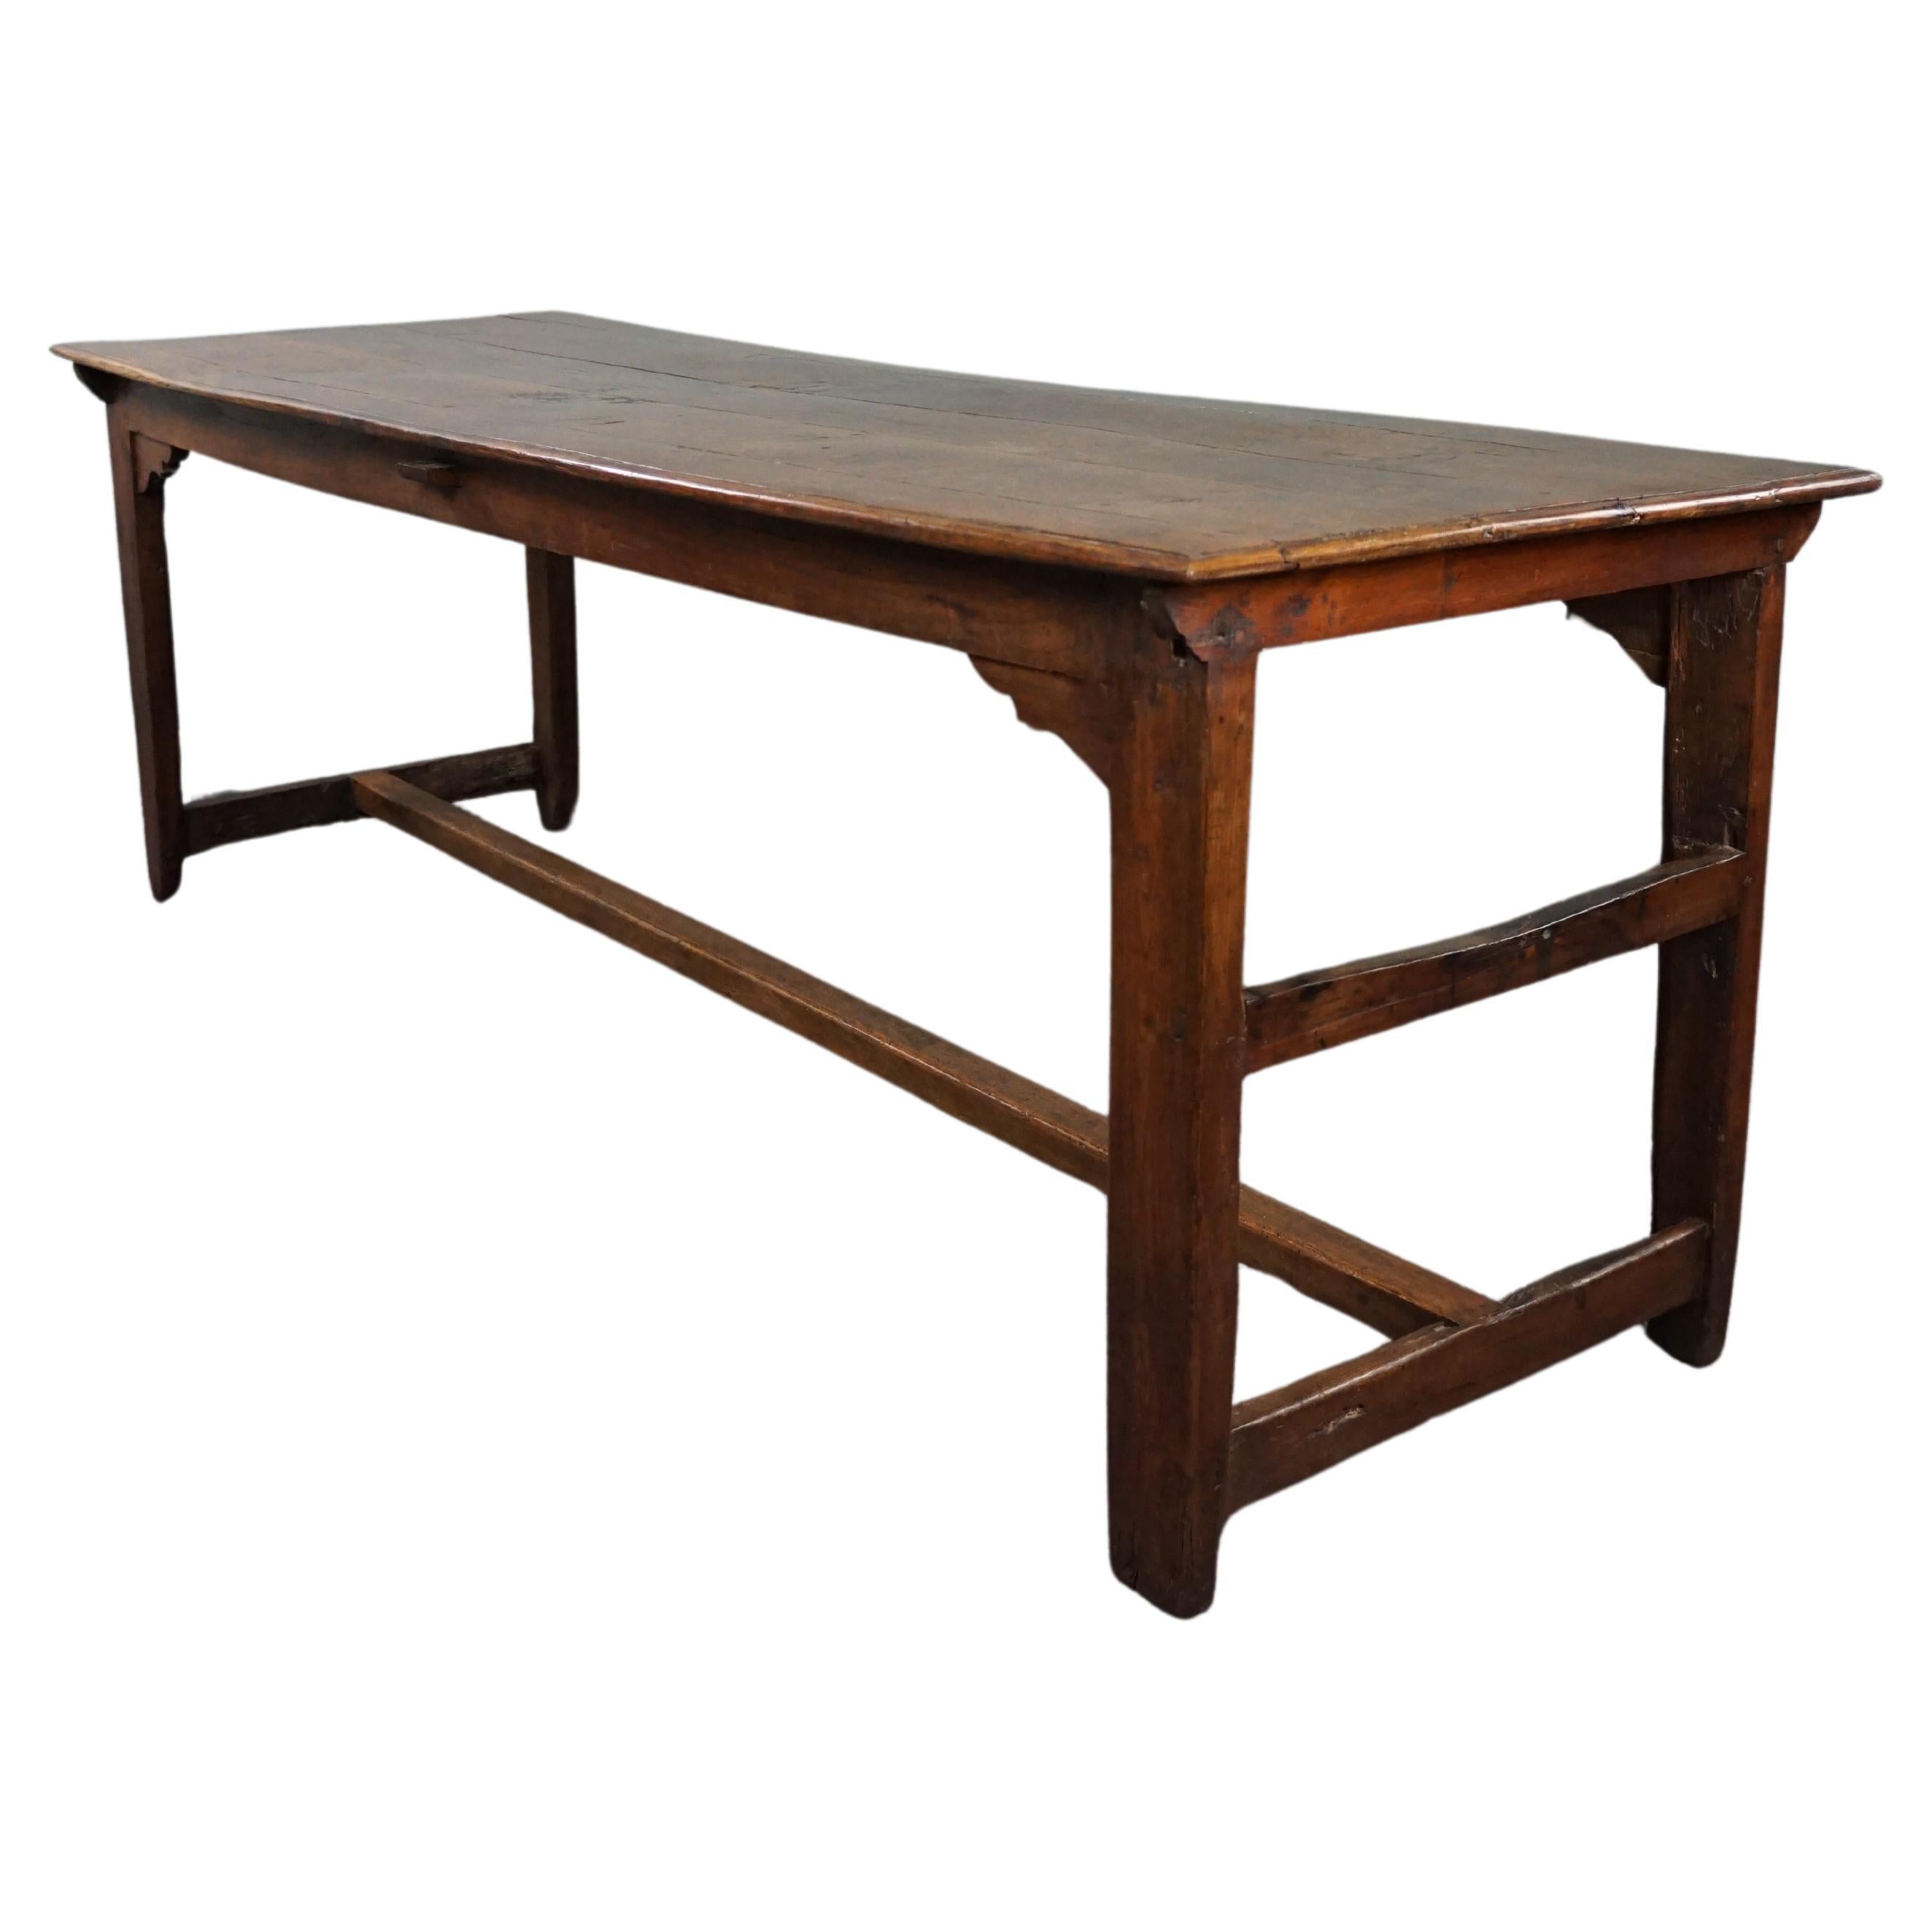 Early 18th-century antique French oak dining table in a beautiful size For Sale